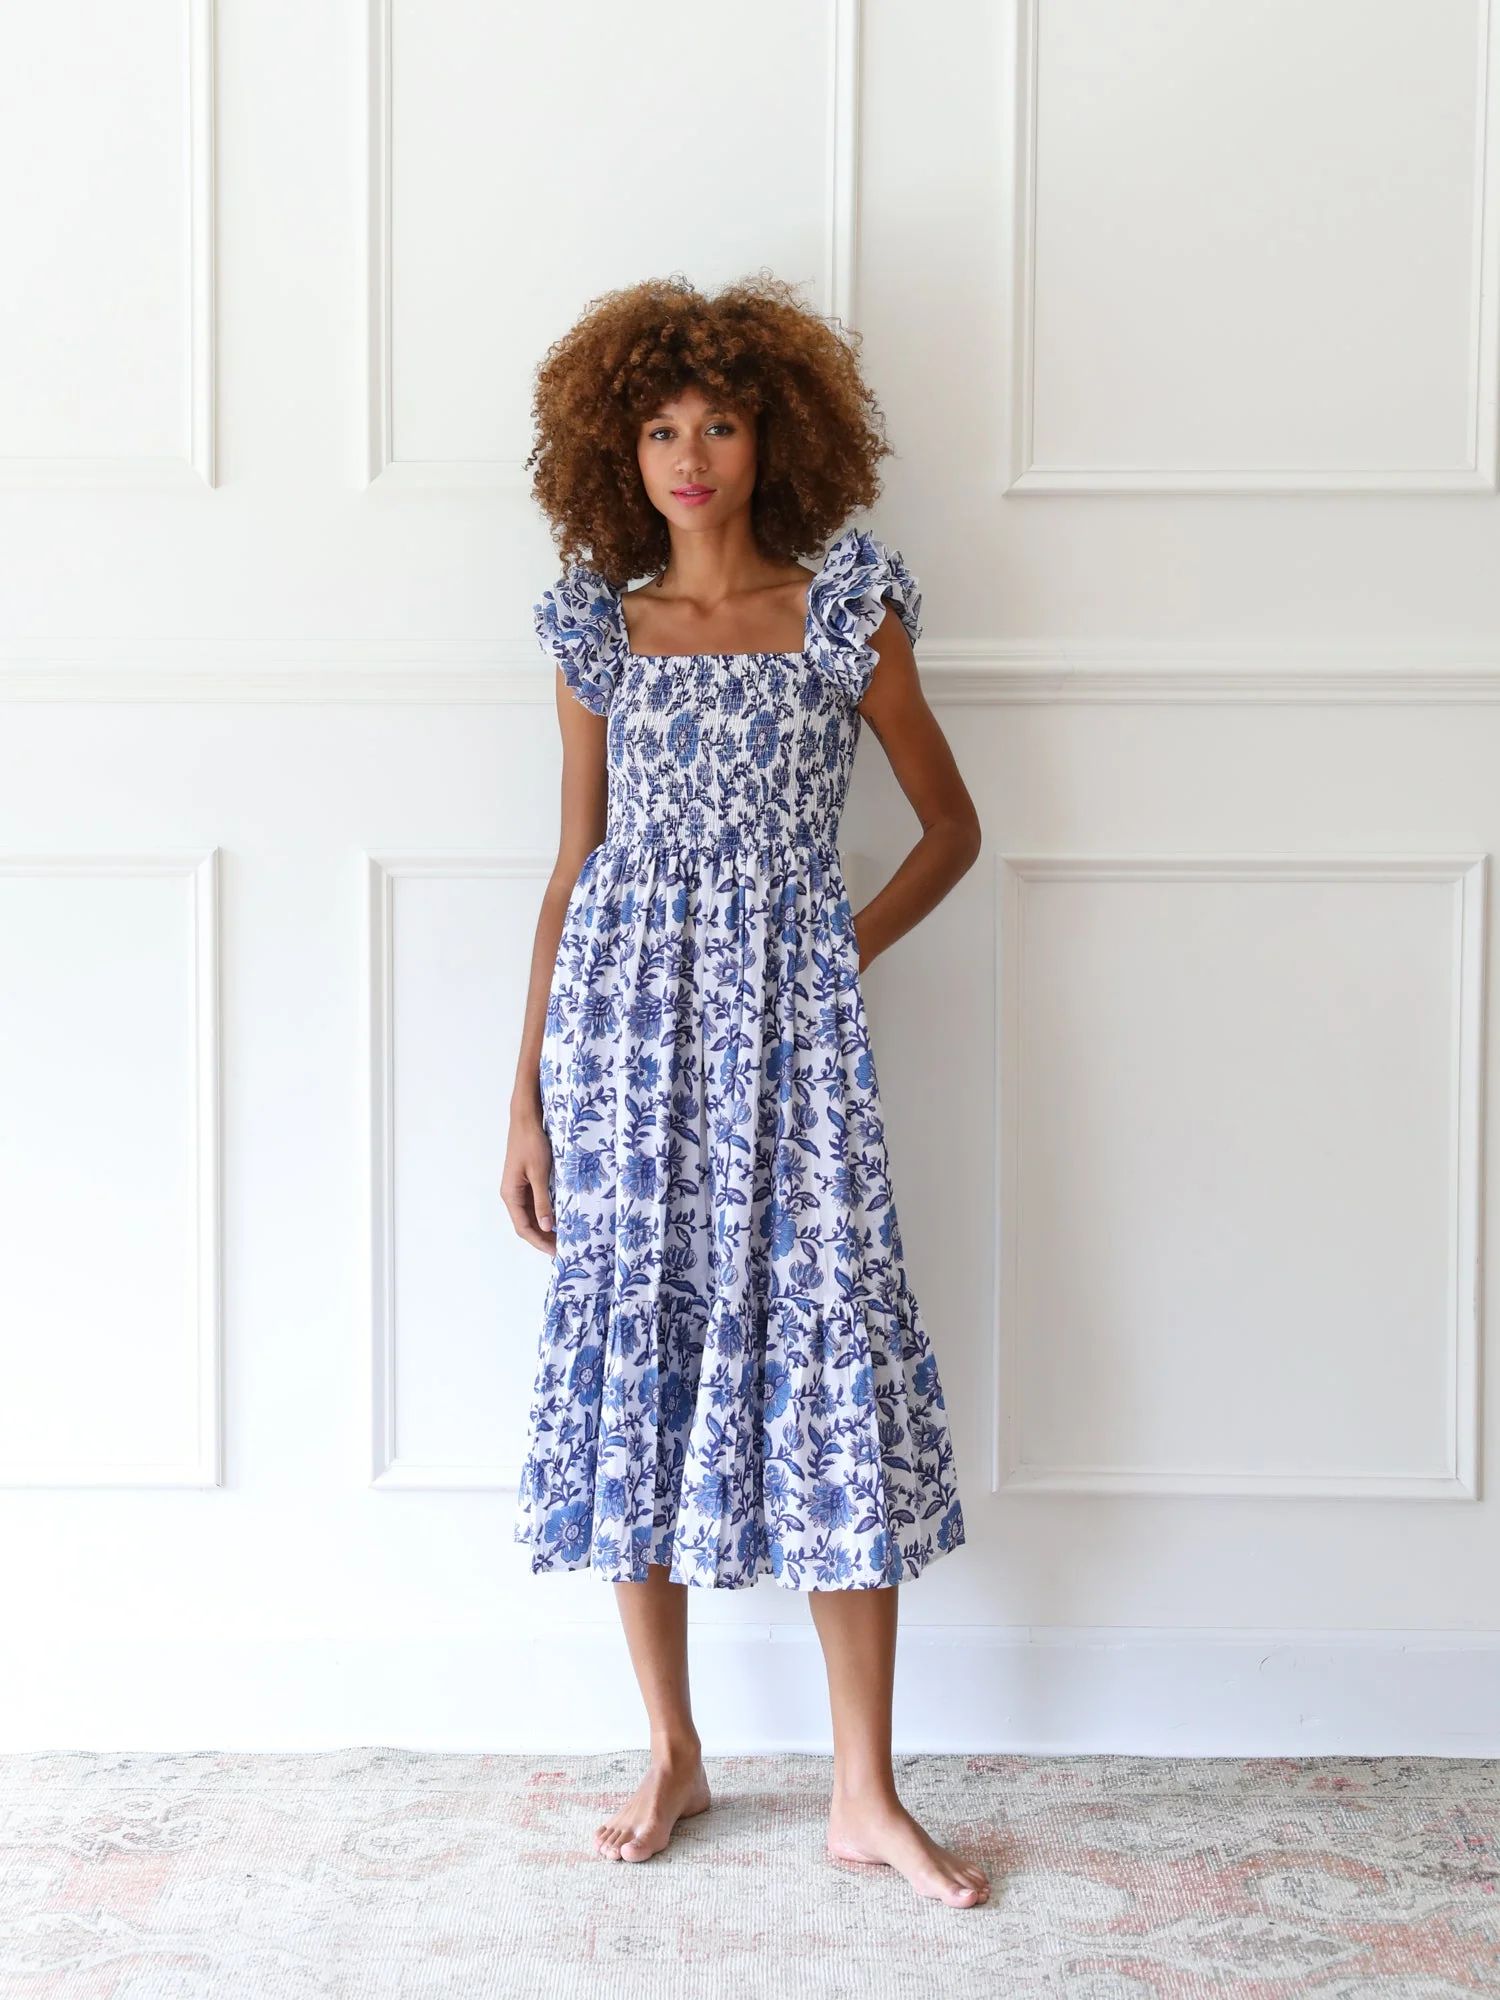 Shop Mille - Olympia Dress in Blue Floral | Mille